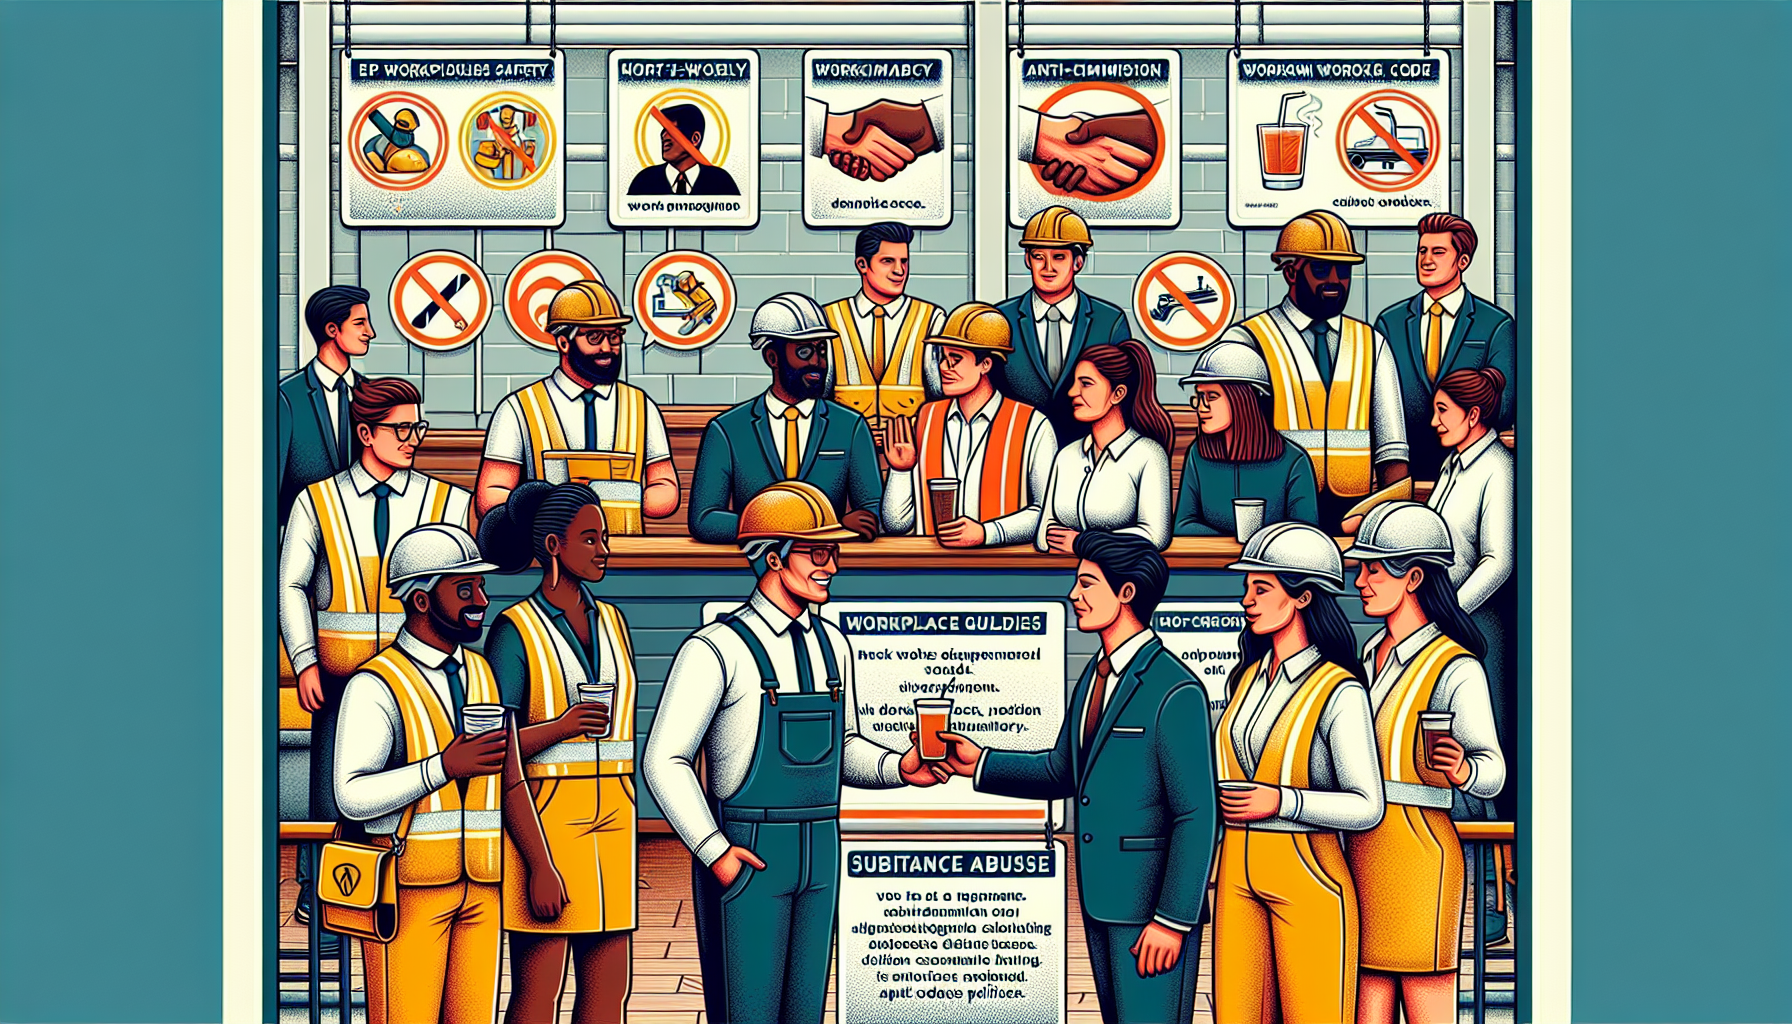 Illustration of workplace conduct guidelines